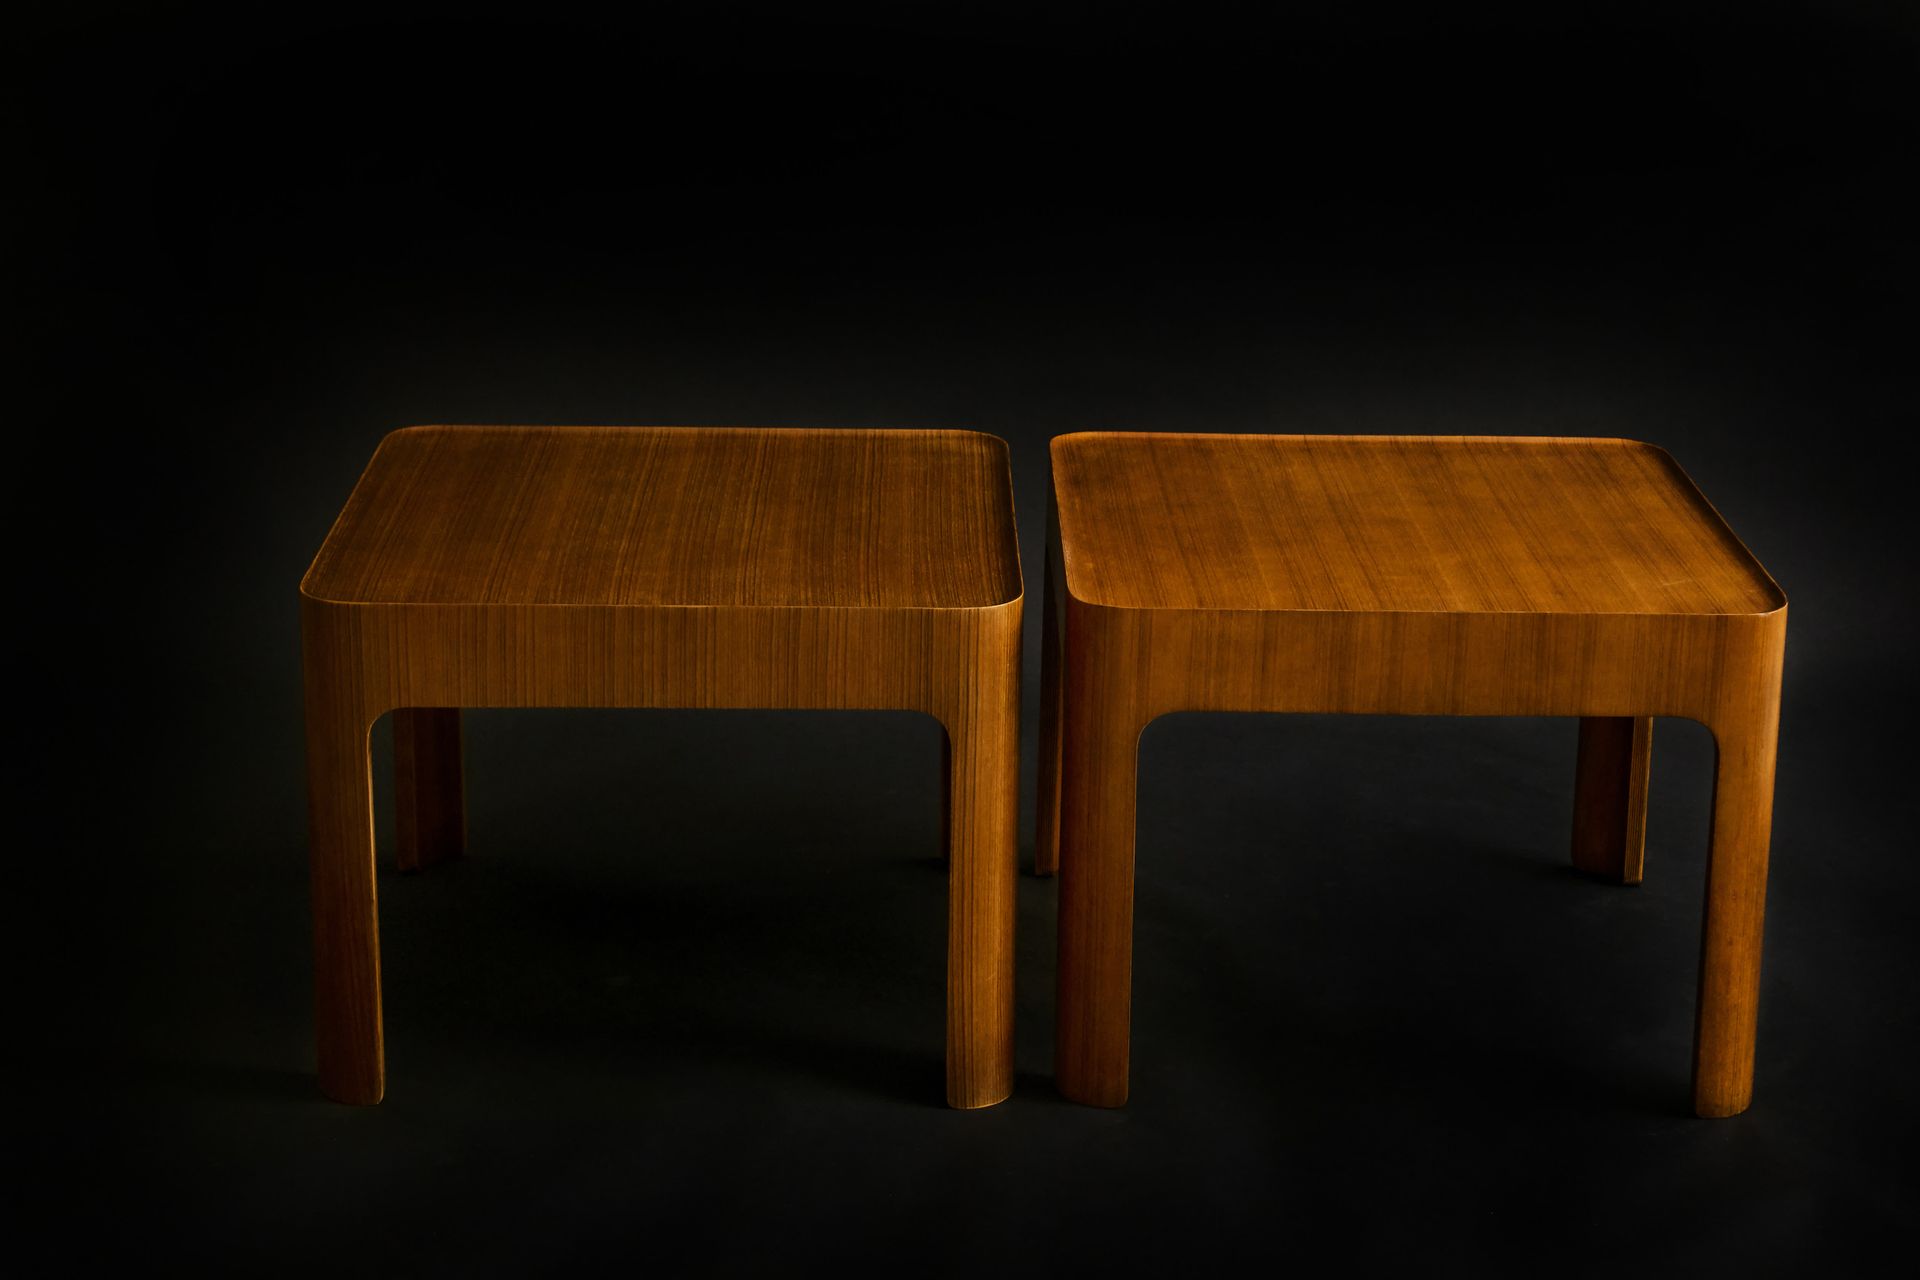 ISAMU KENMOCHI Pair of side tables
Japanese elm and plywood
1966
H 45 W 60 D 60c&hellip;